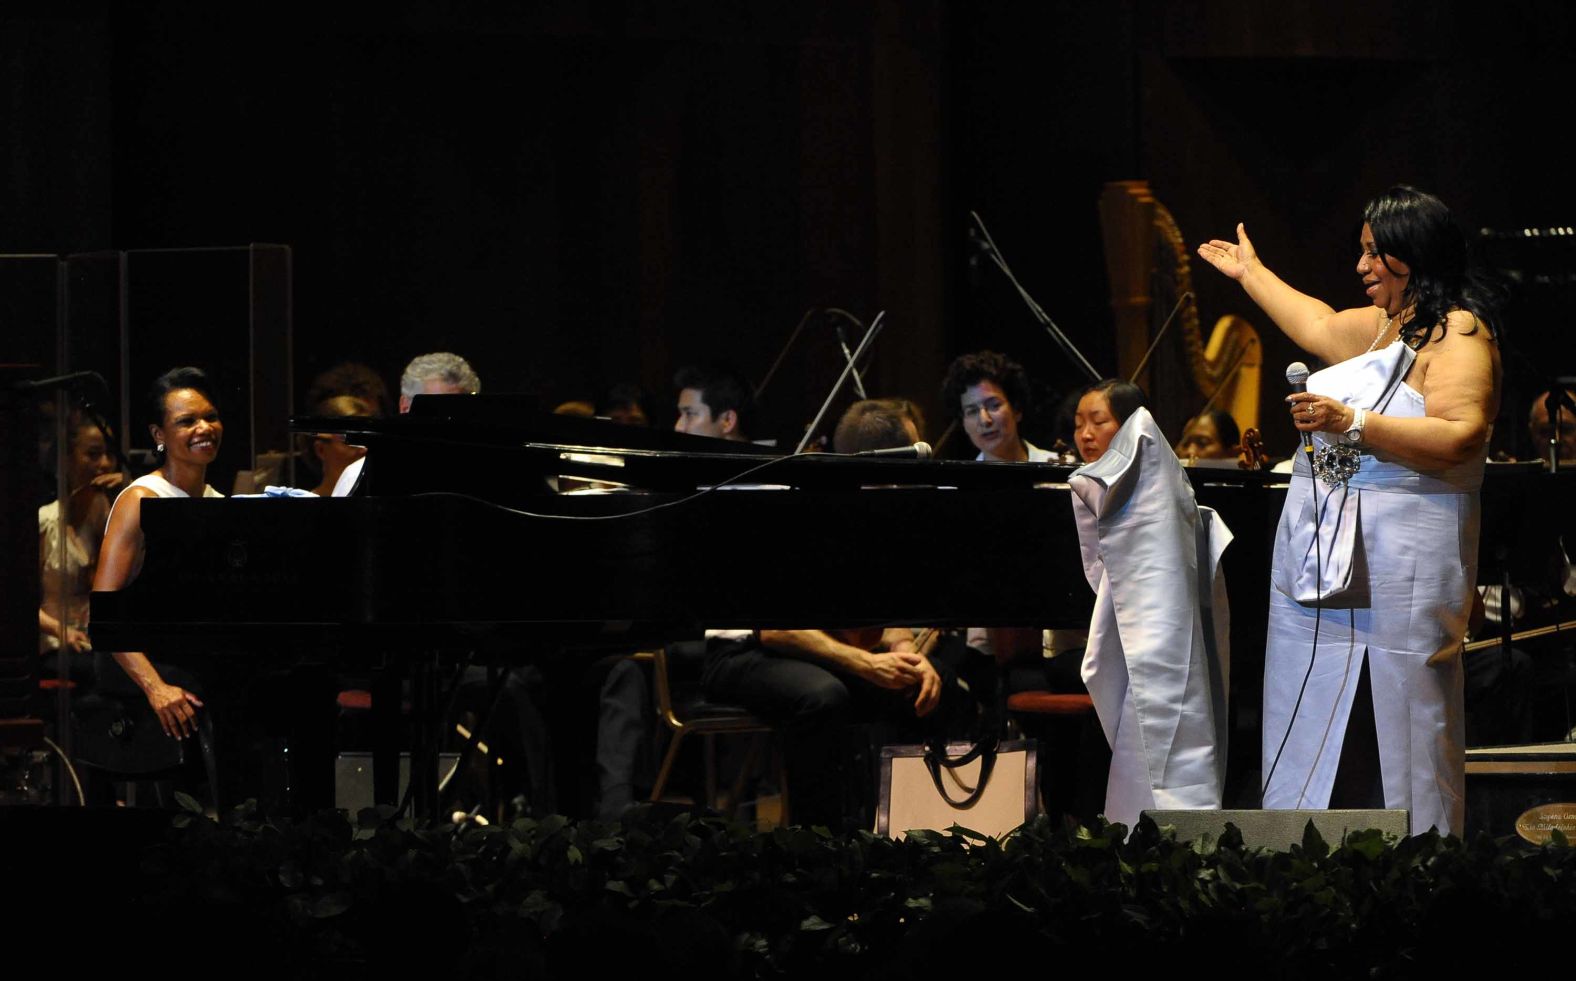 Franklin during a 2010 concert, accompanied by former Secretary of State Condoleezza Rice (far left) at the piano and the Philadelphia Orchestra.